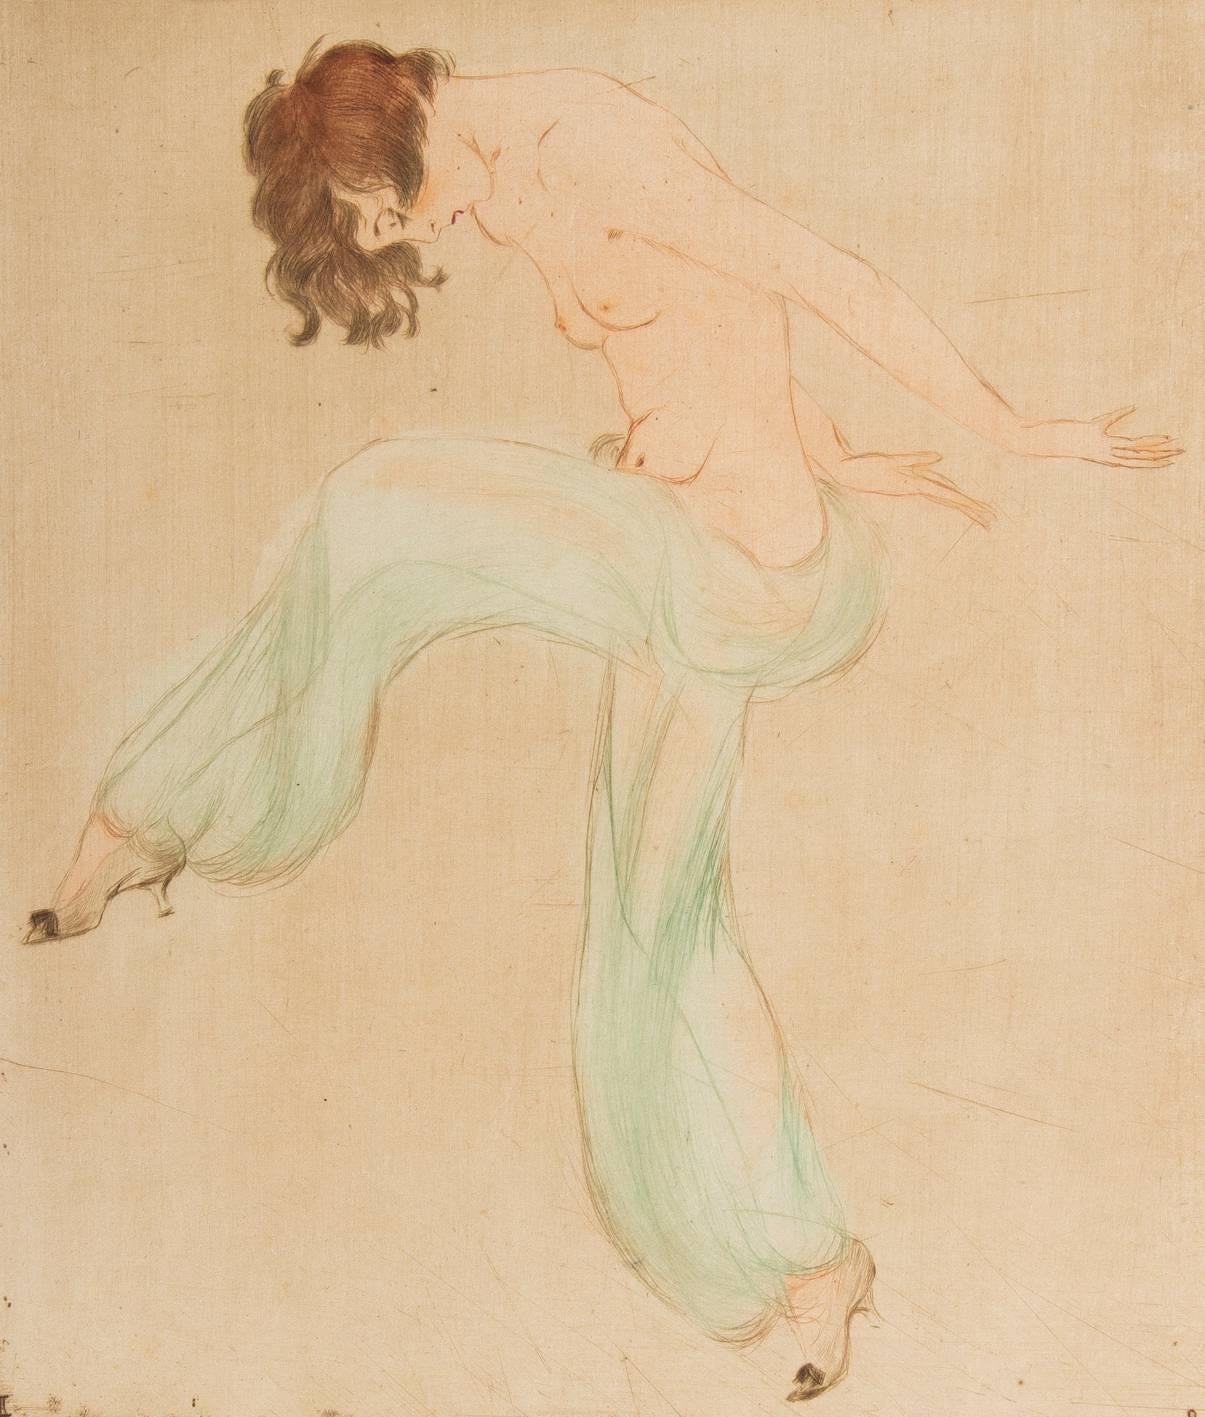 Vala Moro (1907), Vienna 
Art Deco dancing nude, 1924, from the portfolio “Tanz” 
Original colored etching, pencil-signed lower right, Vala Moro“
The picture shows a dancing female figure in green trousers with high heels. 

Vala Moro (1907)